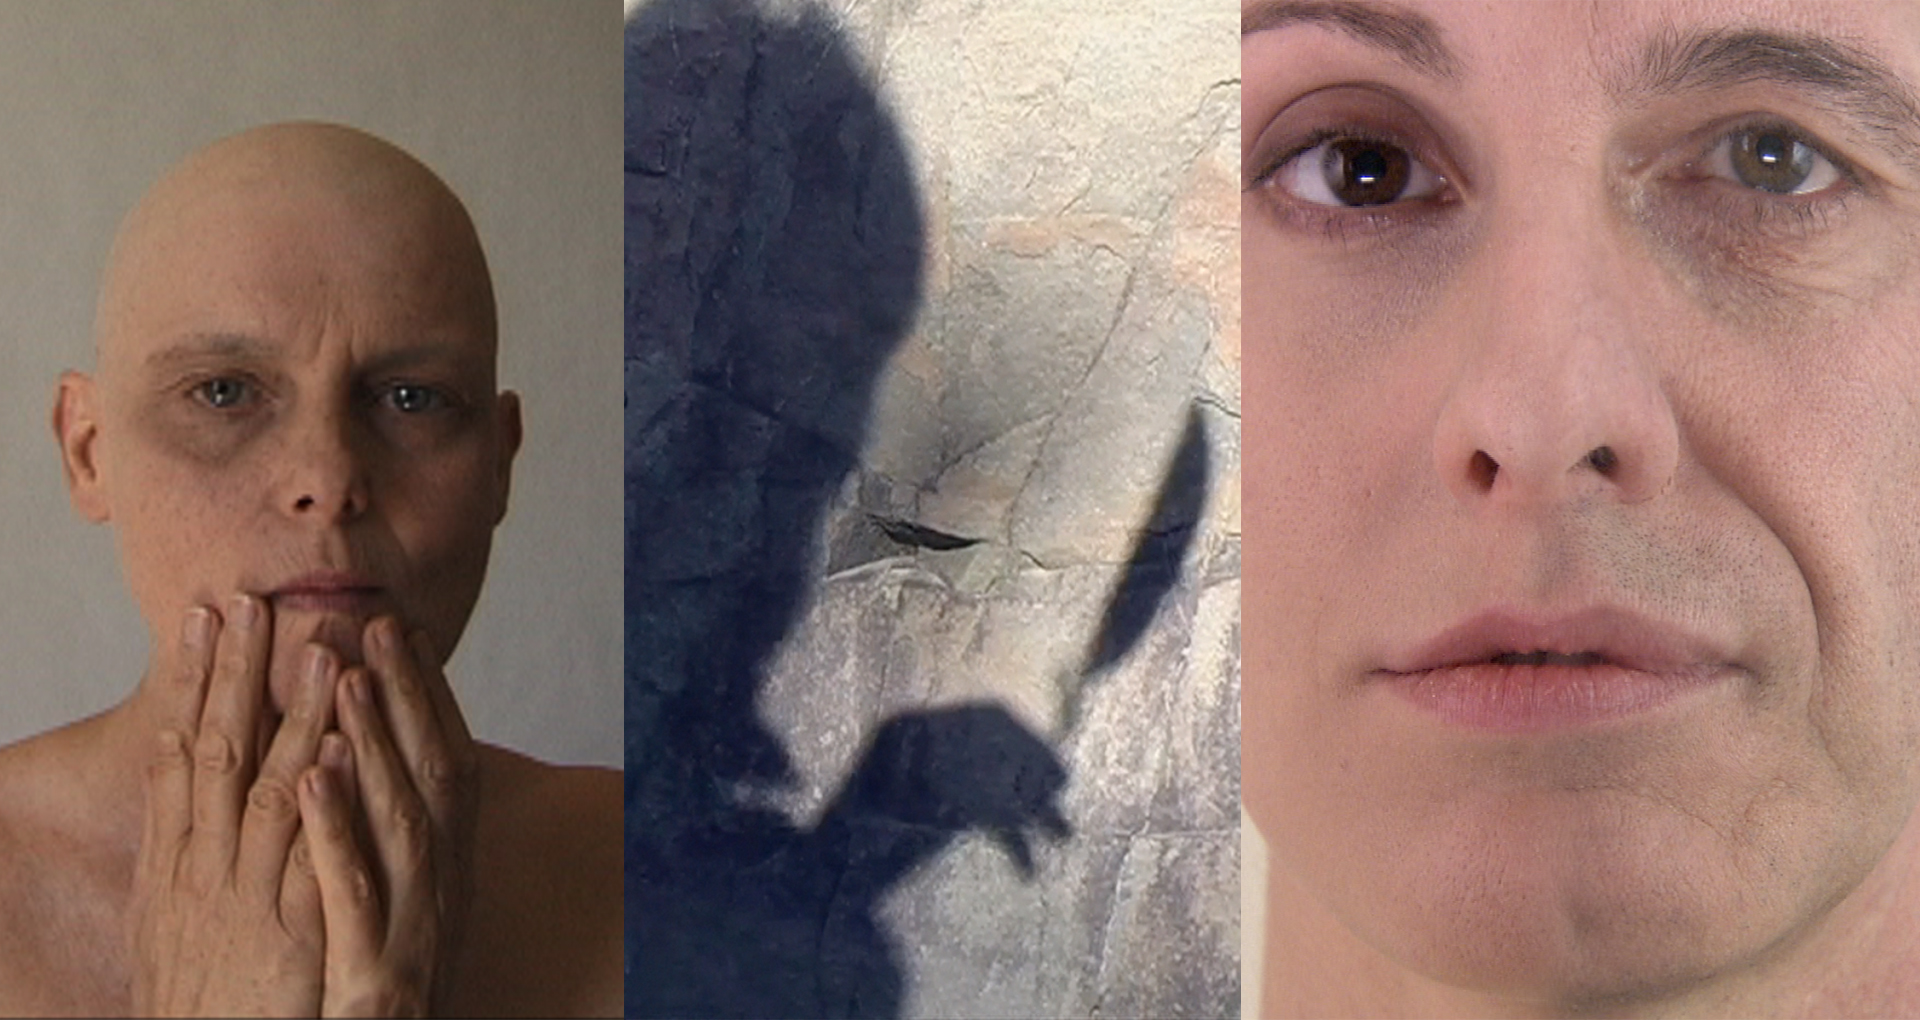 3 pictures. On the left a bald woman, in the middle a woman's shadow, and on the right, a montage of a woman and man's face